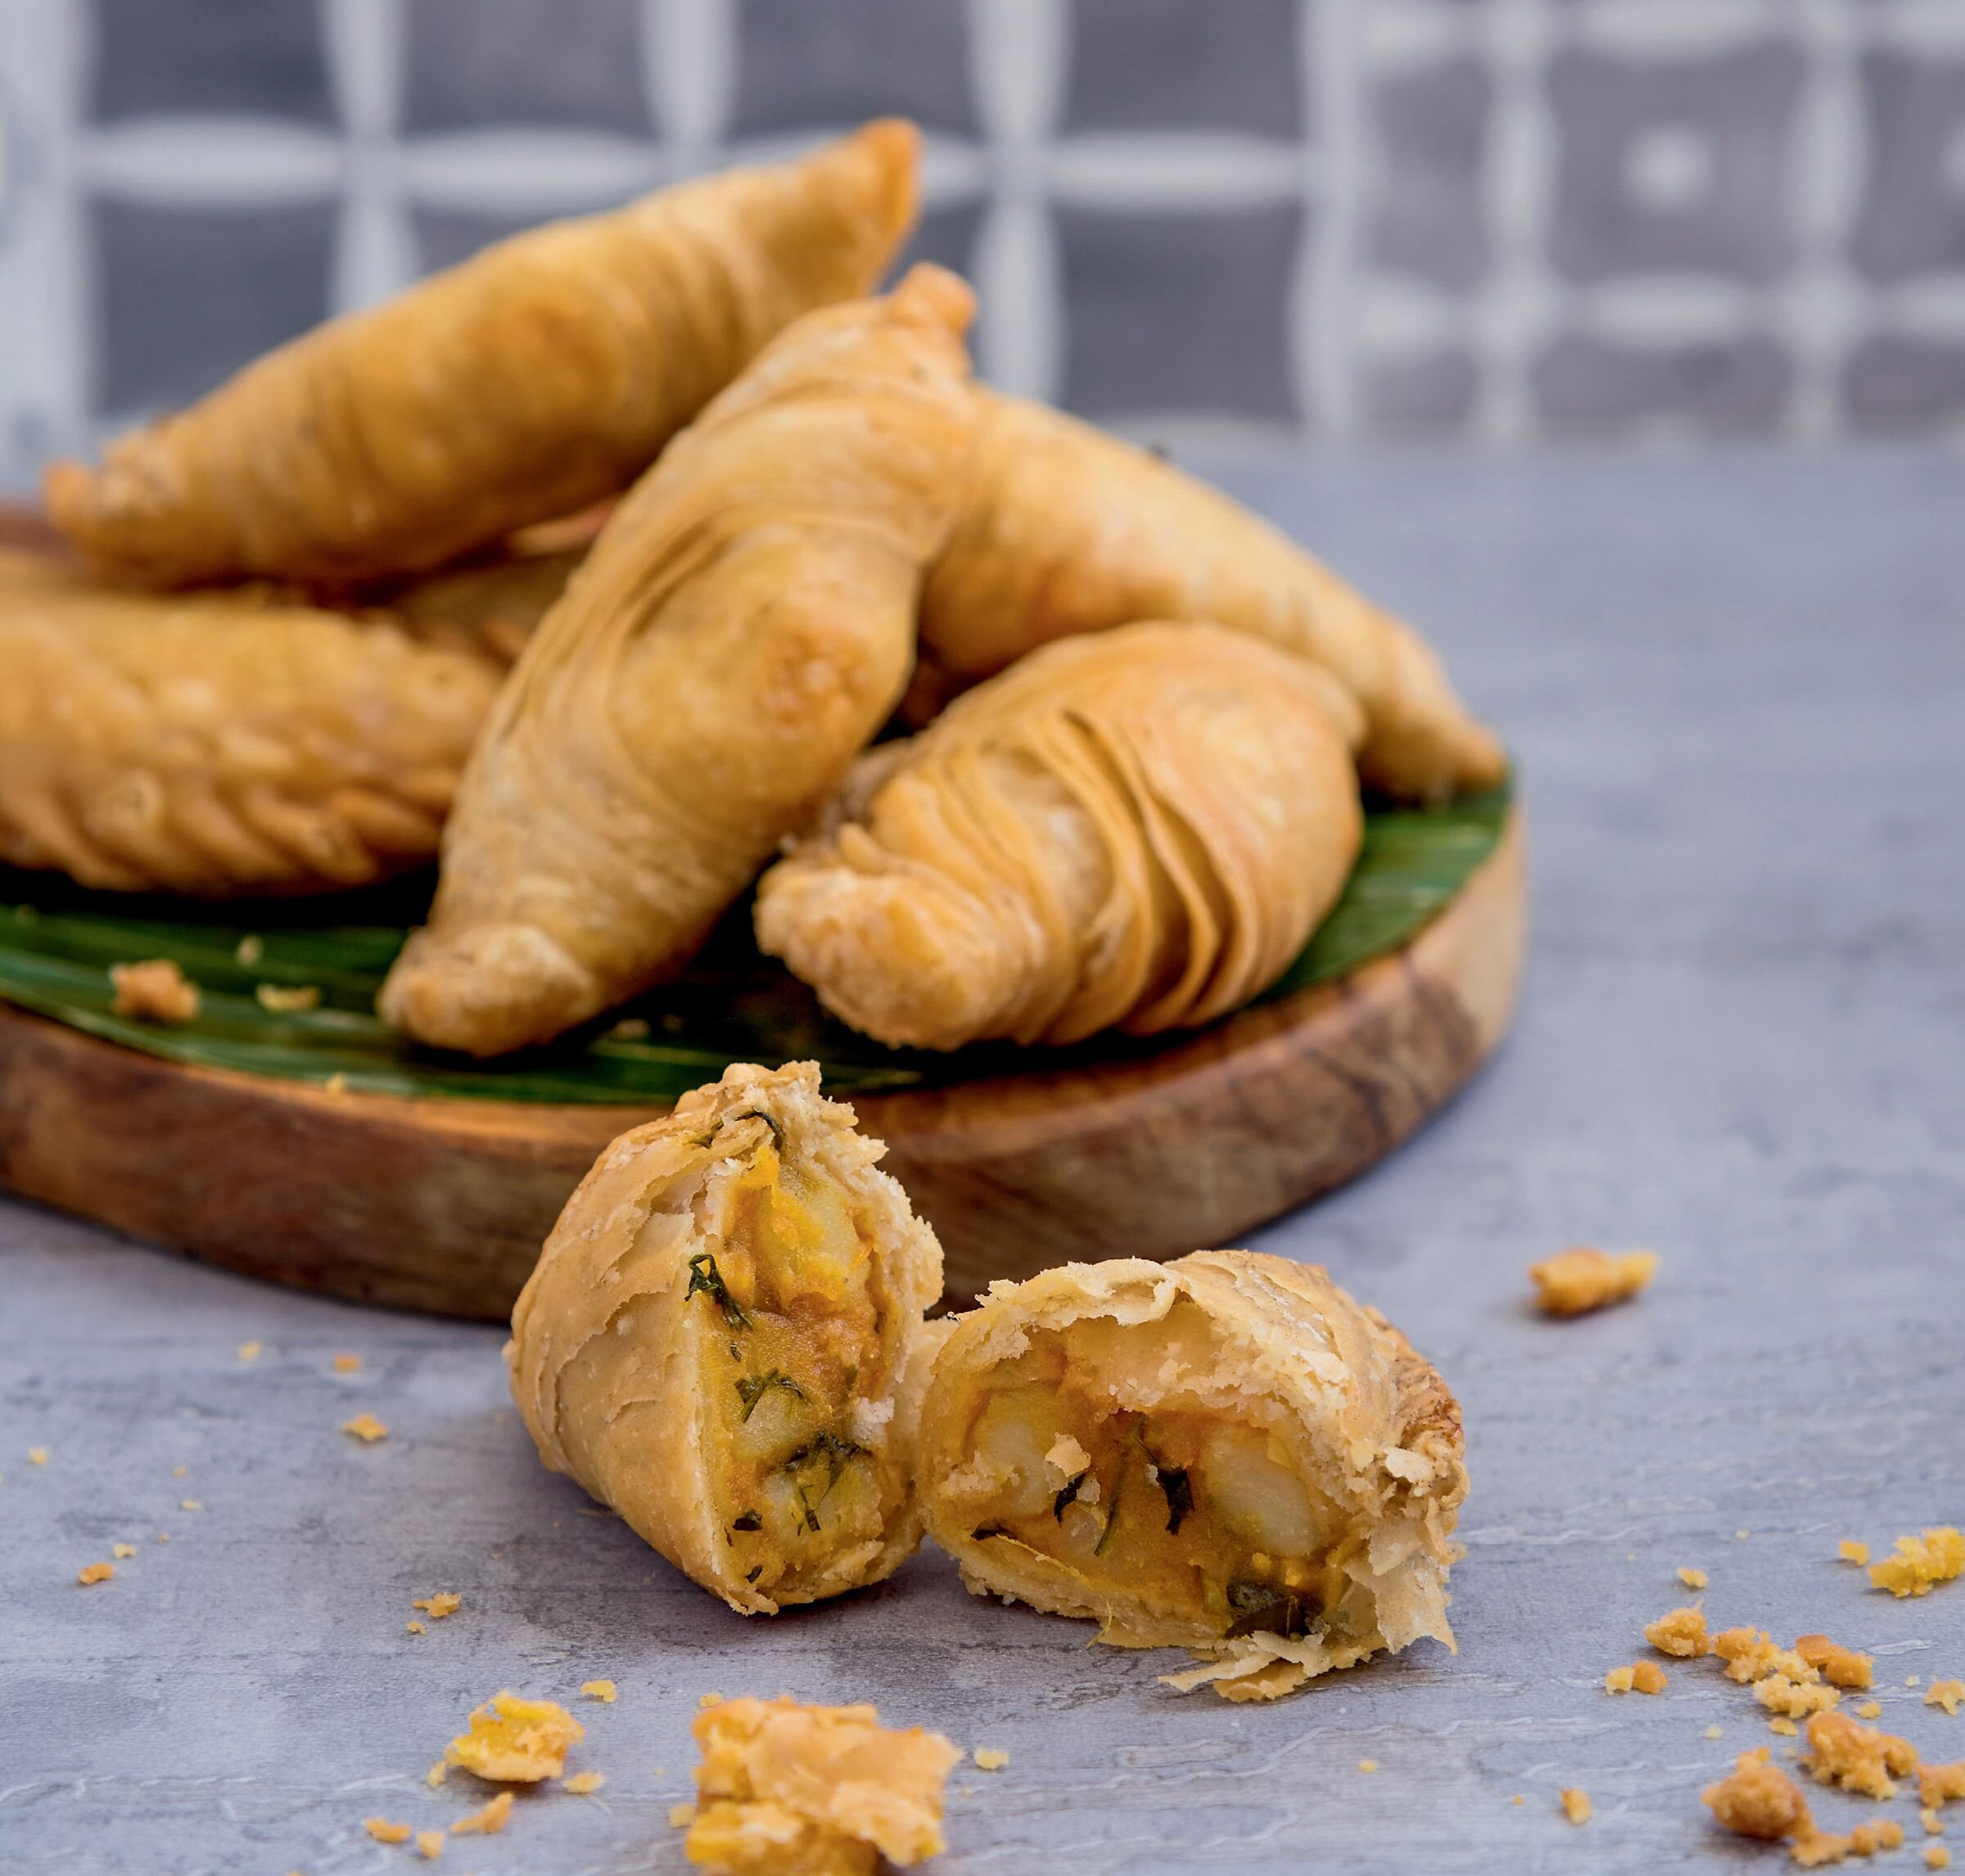 The key to Zaleha’s Curry Puffs is getting the thin, flaky pastry just right.